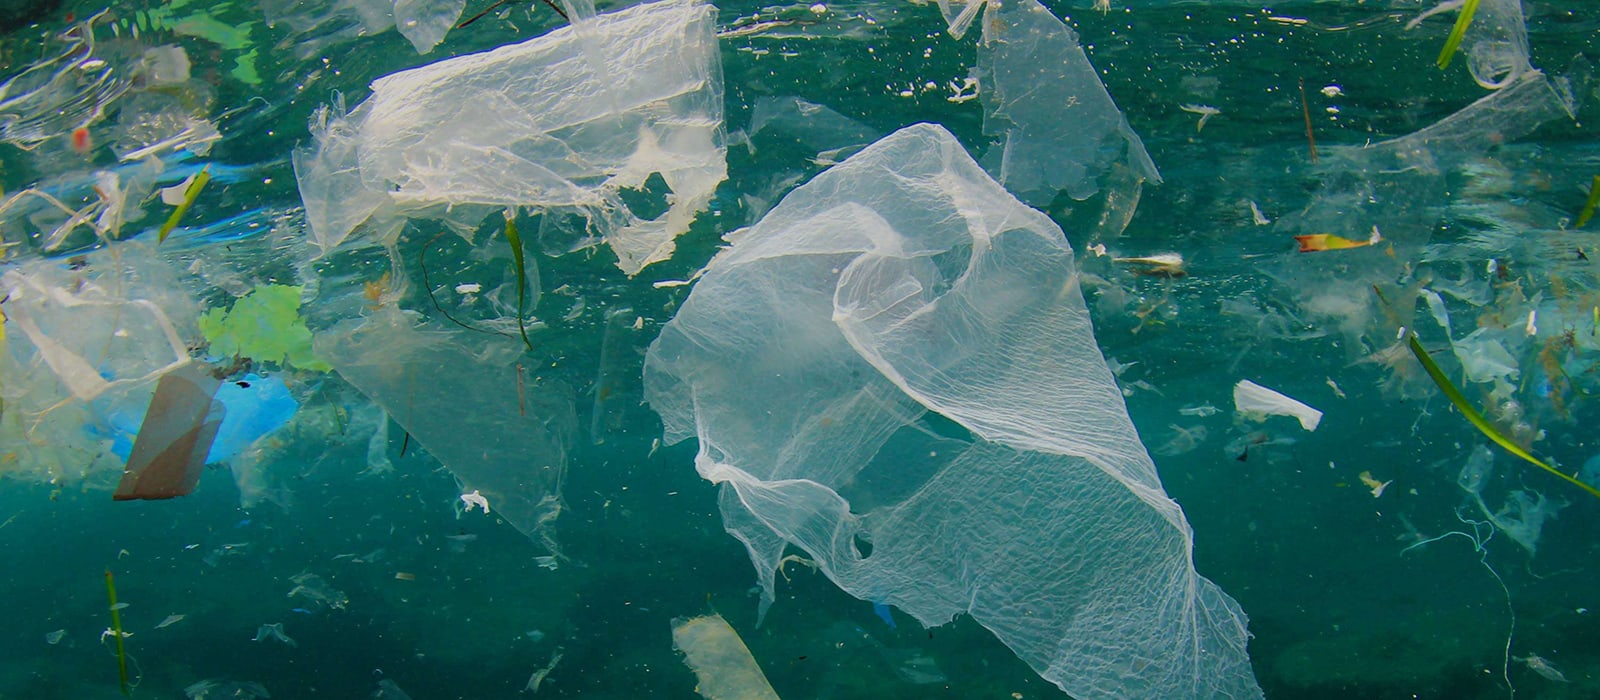 Turning the Tide on Plastic Pollution in Bali